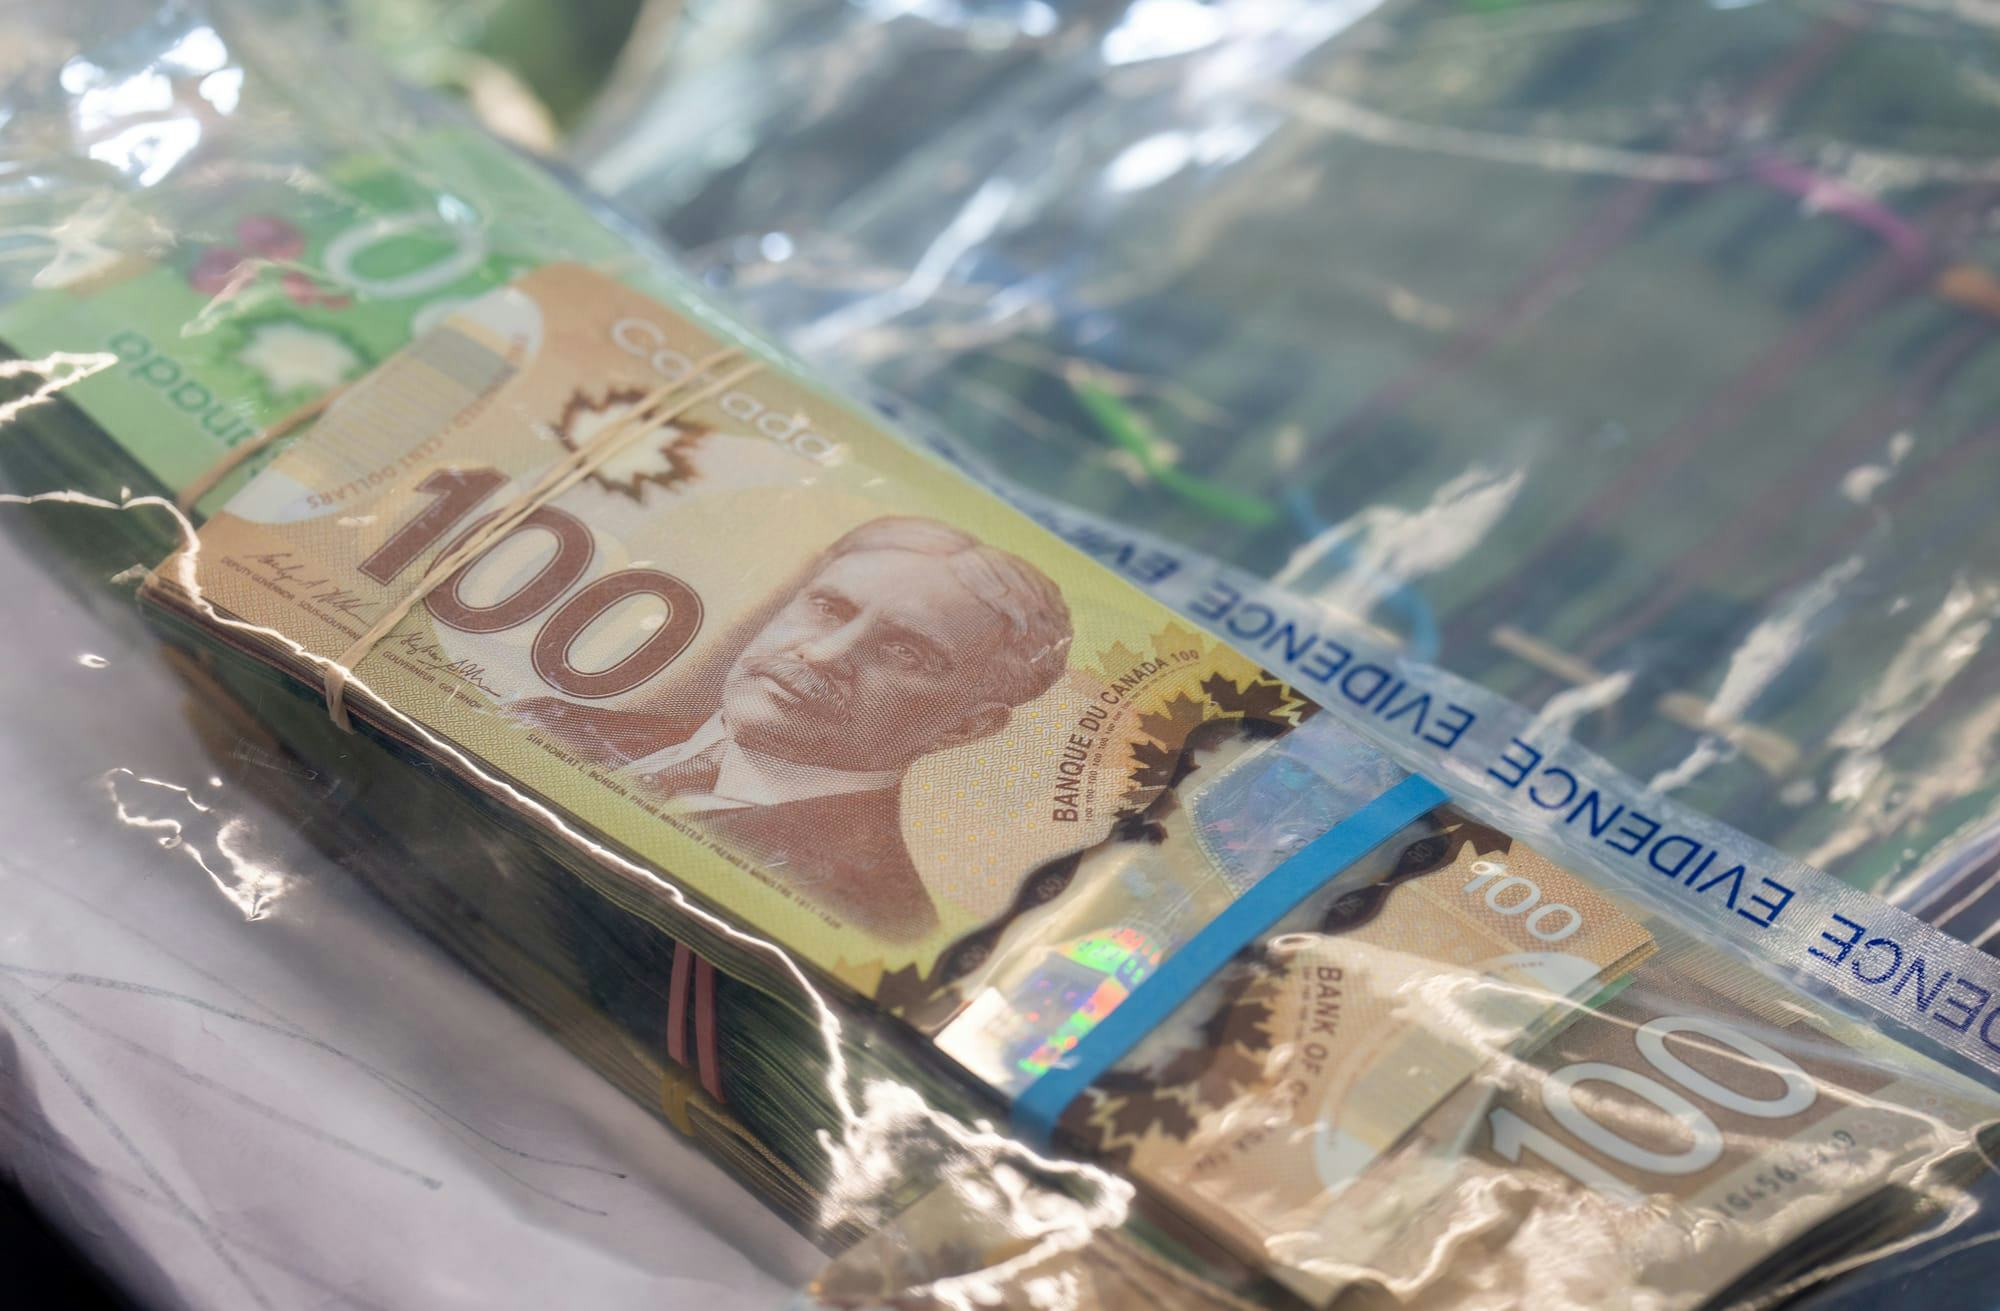 Banded Canadian currency inside in a clear plastic bag labelled "evidence." 